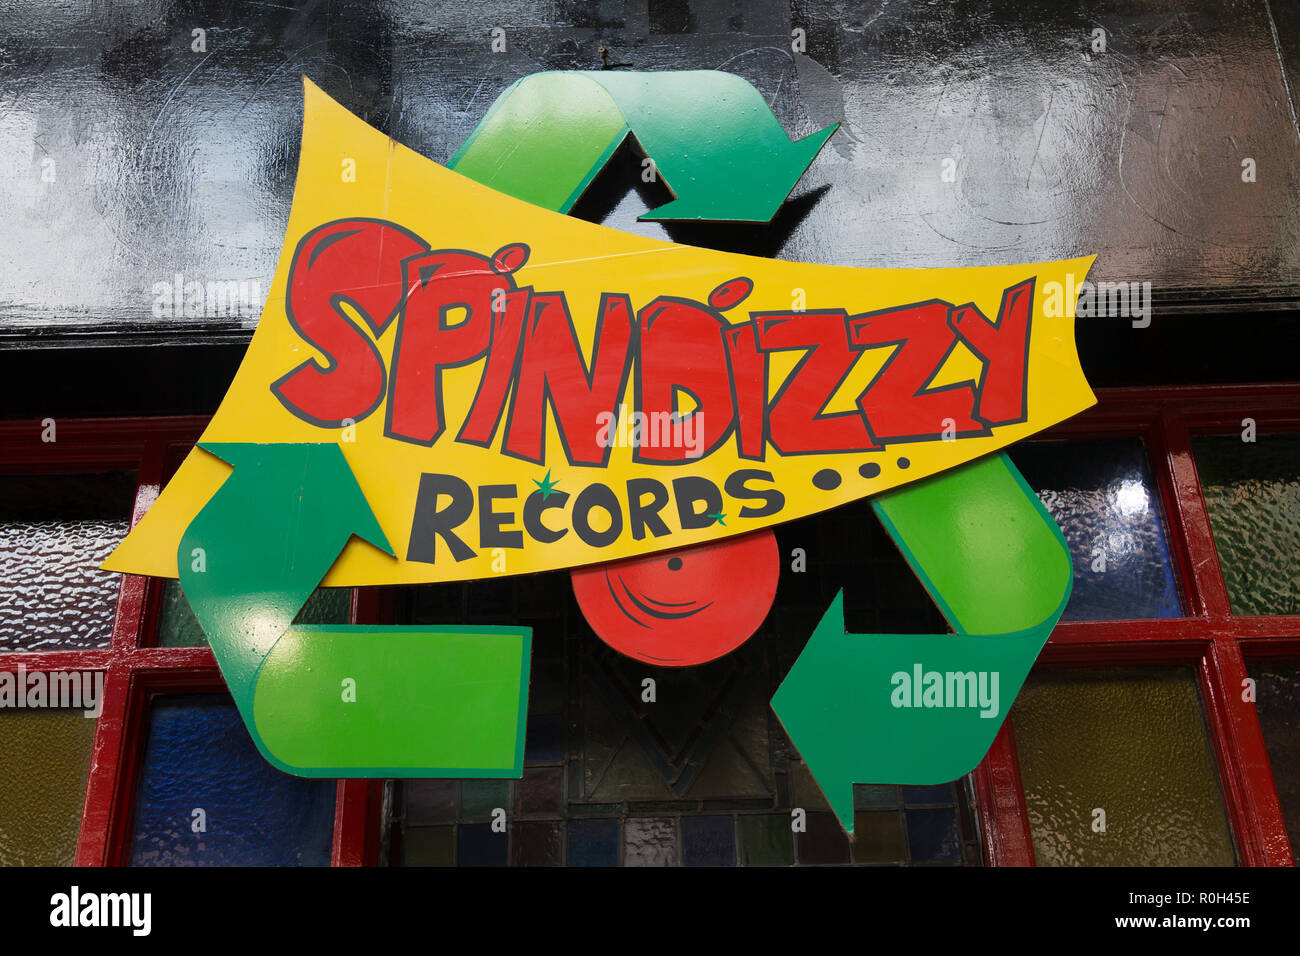 Spindizzy Records Shop, Georges Street Arcade - South City Market, Dublin; Irland Stockfoto